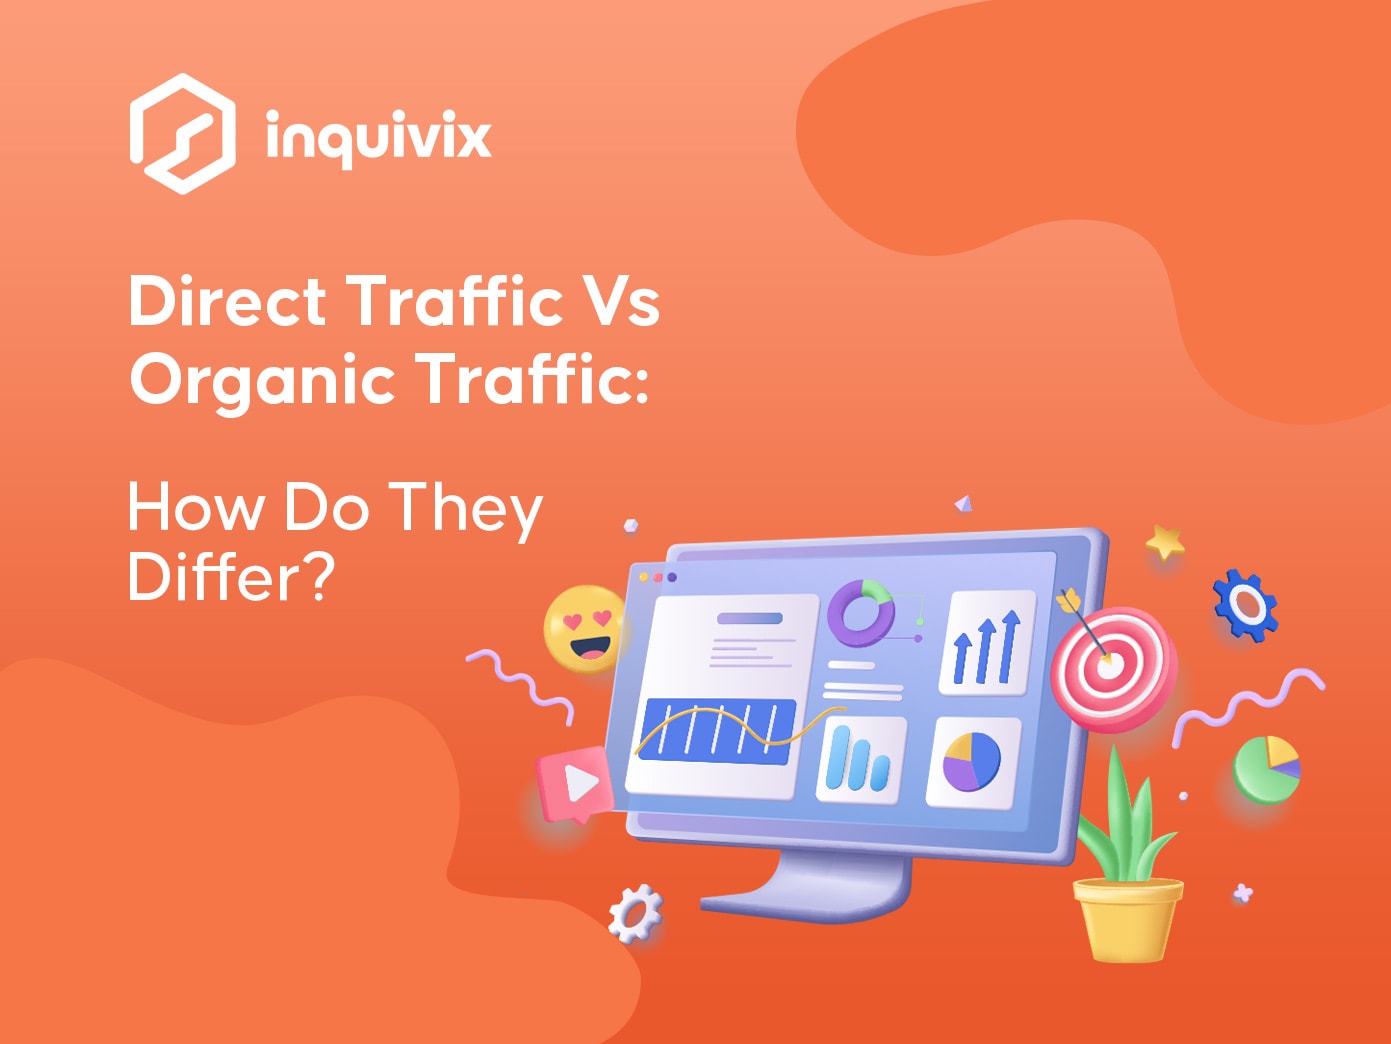 Direct Traffic Vs Organic Traffic: How Do They Differ?